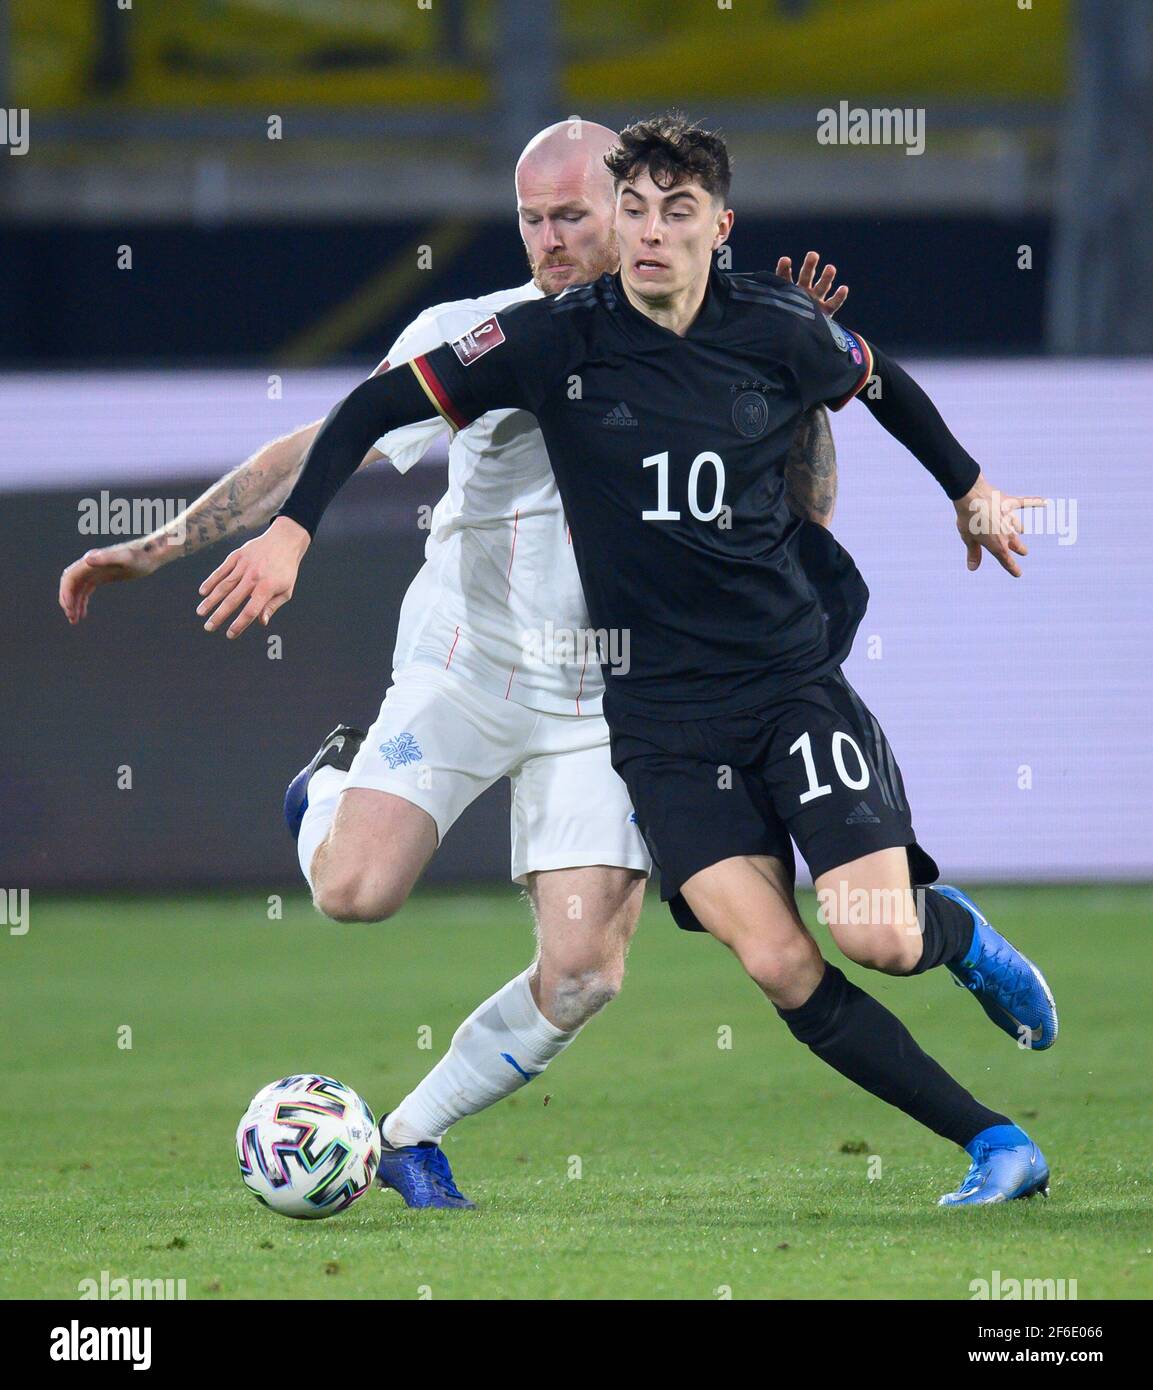 Duisburg, Deutschland. 25th Mar, 2021. Kai Havertz, single action, cut-out.  GES/Fussball/WM-Qualifikation: Germany - Iceland, 25.03.2021 Football/Soccer:  World Cup qualifying match: Germany vs. Iceland, Duisburg, Germany, March  25, 2021 | usage ...